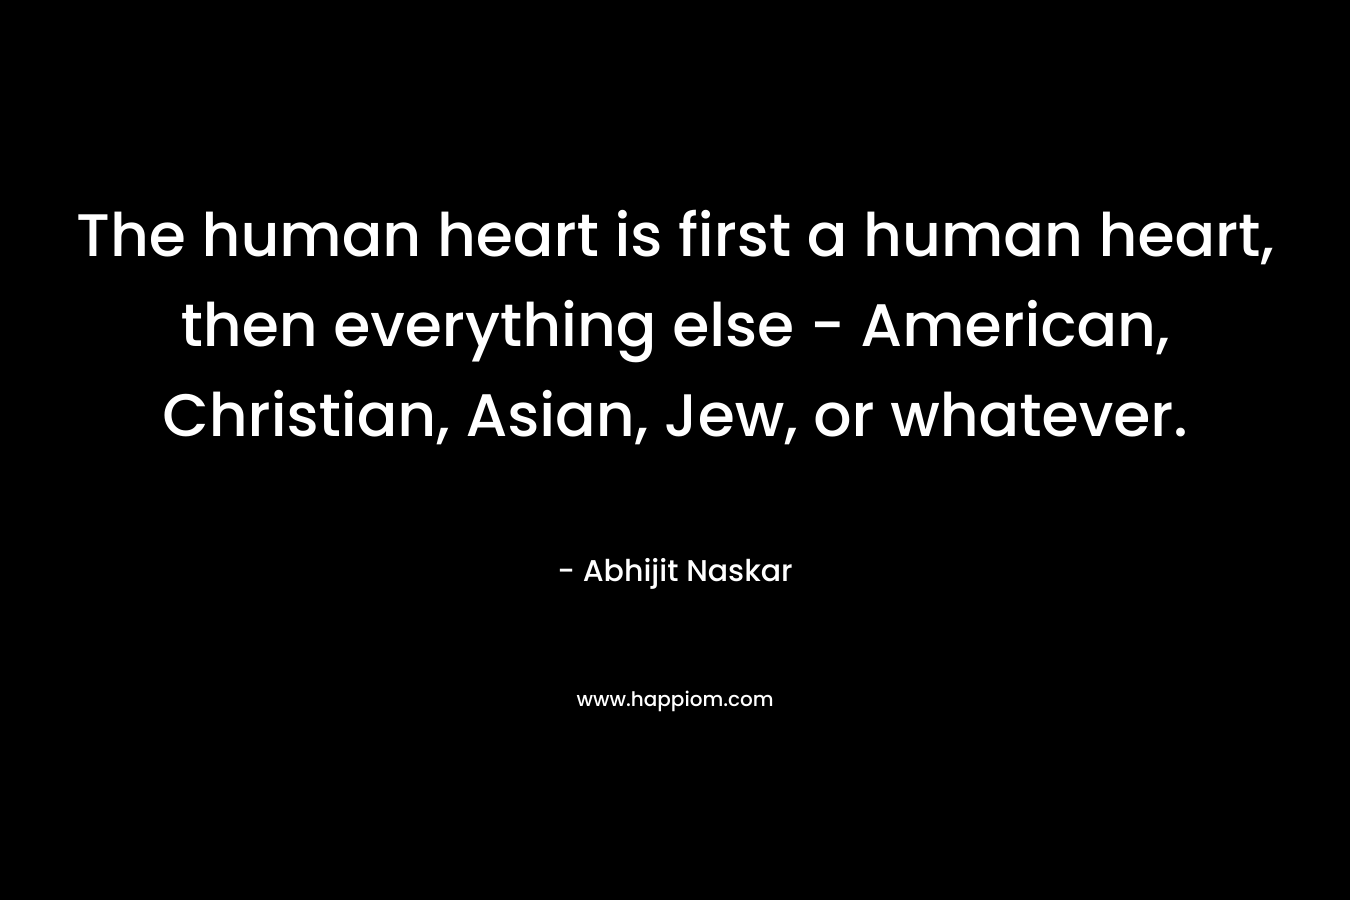 The human heart is first a human heart, then everything else – American, Christian, Asian, Jew, or whatever. – Abhijit Naskar